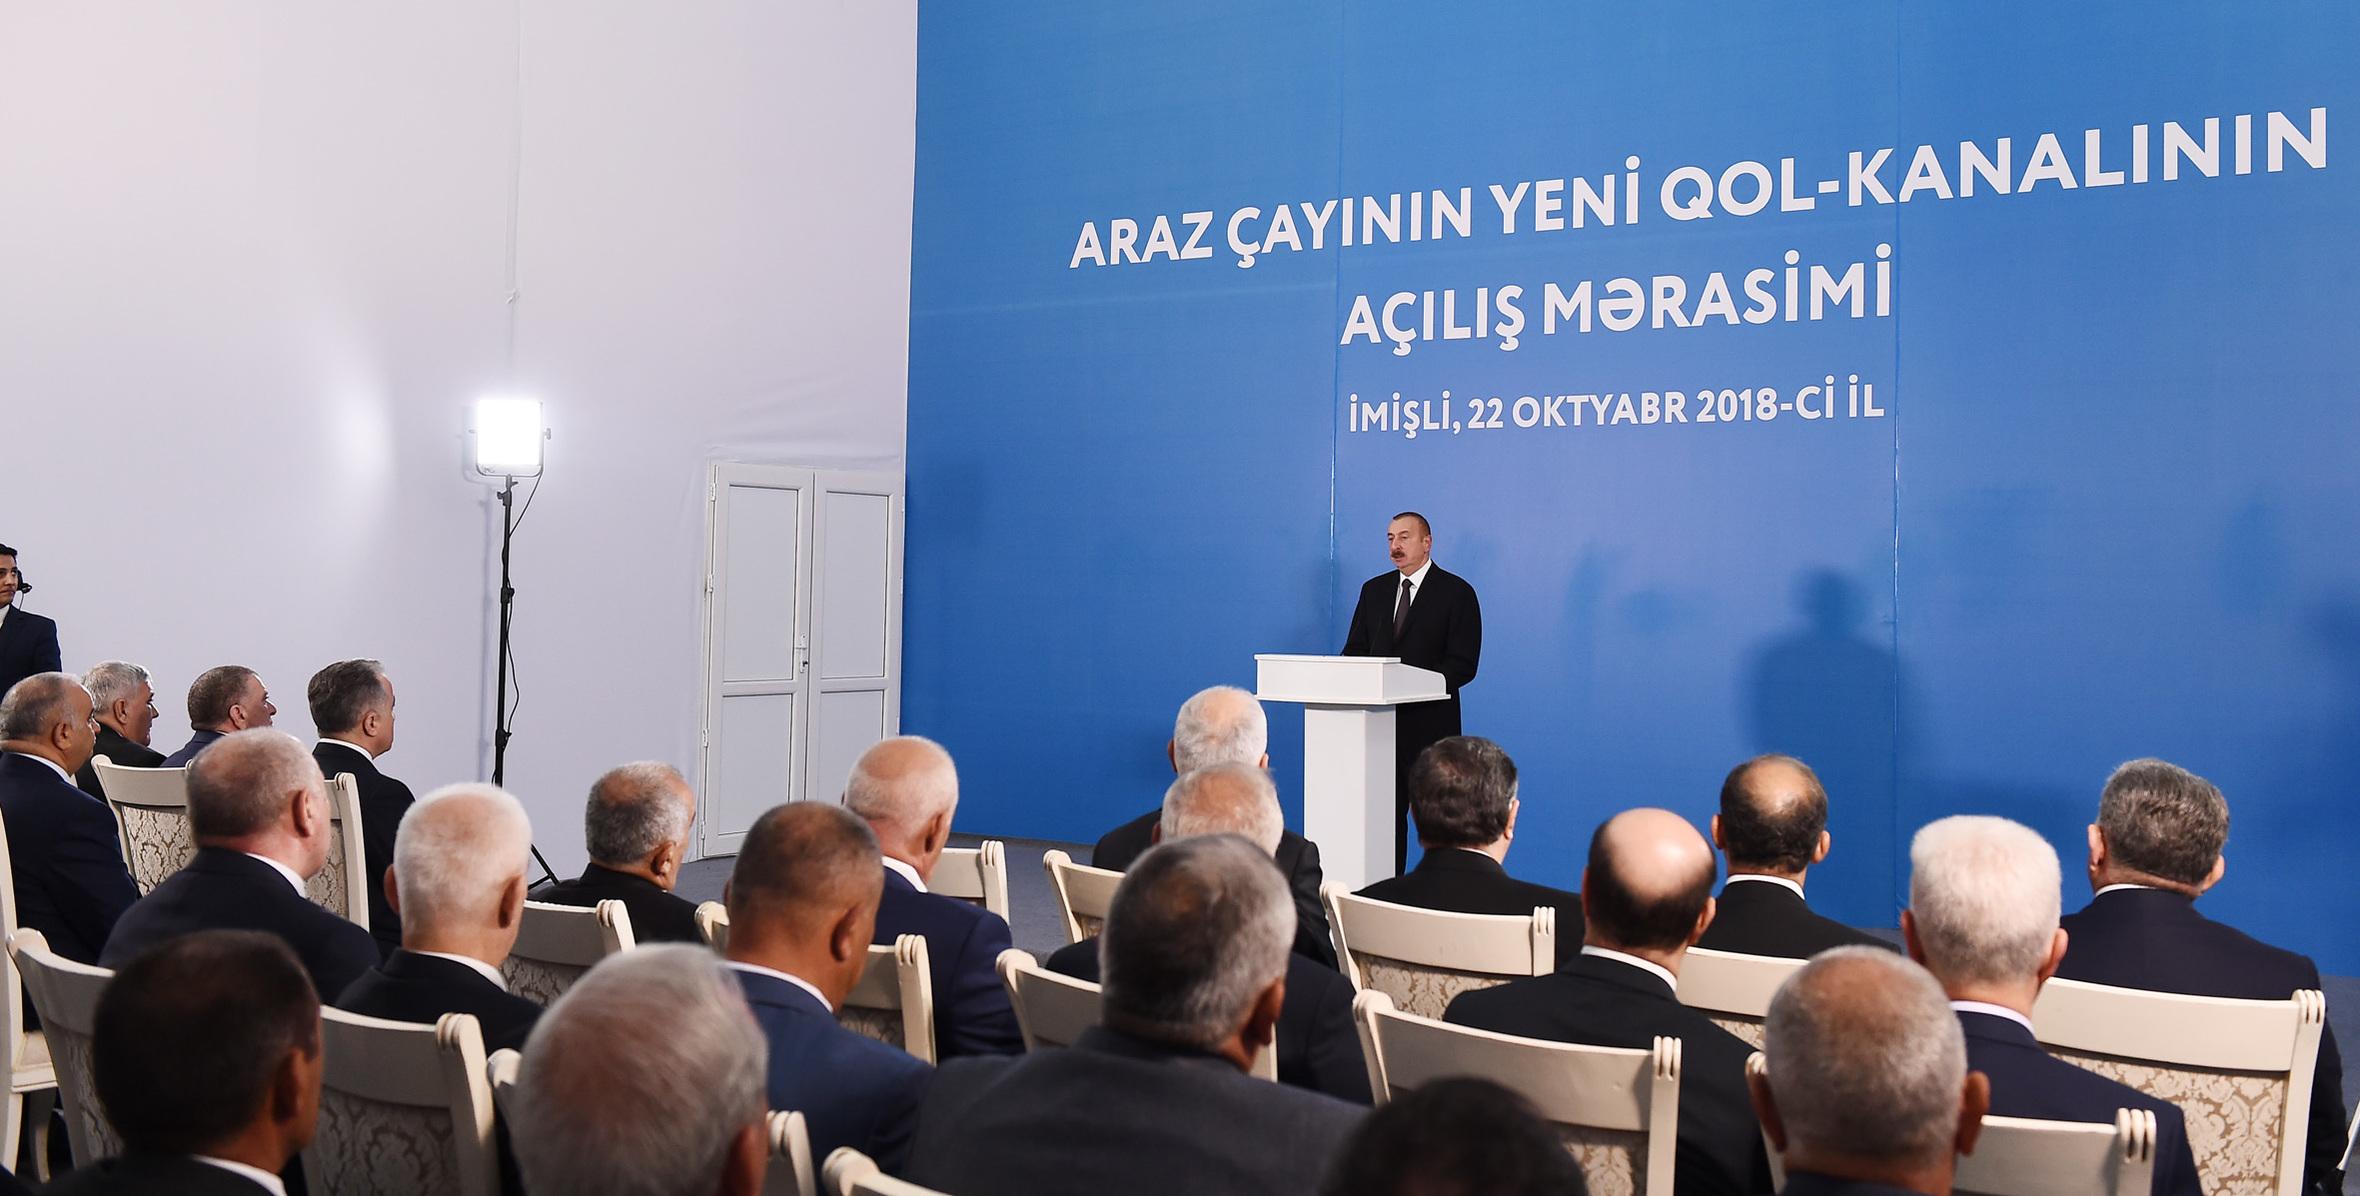 Speech by Ilham Aliyev at the opening of a new distributary channel of the Araz River